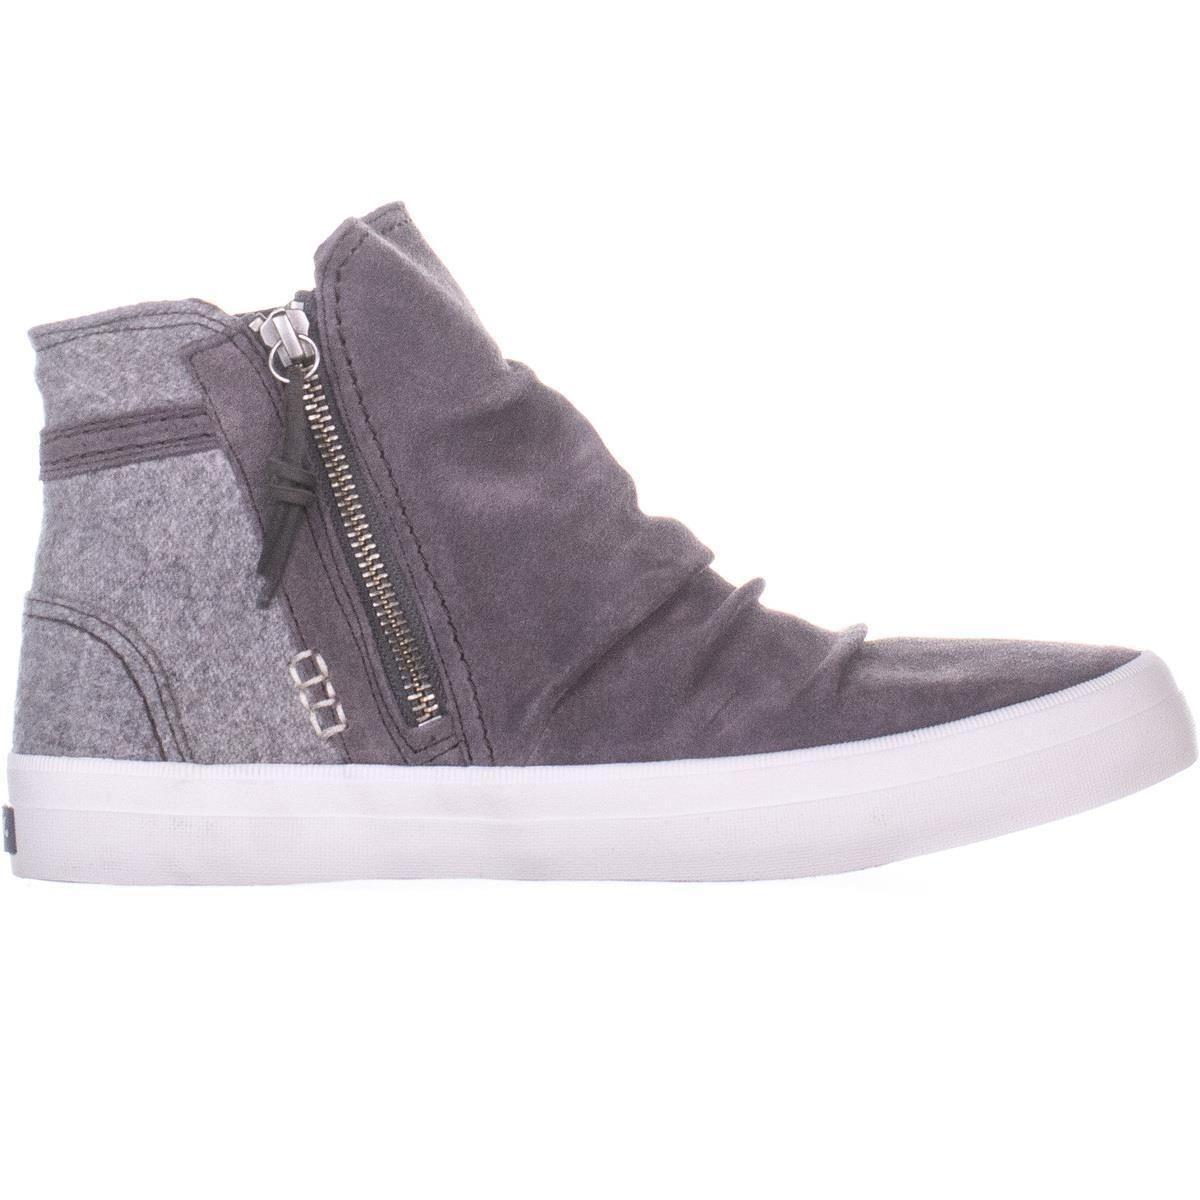 Sperry Crest Zone High Top Sneakers